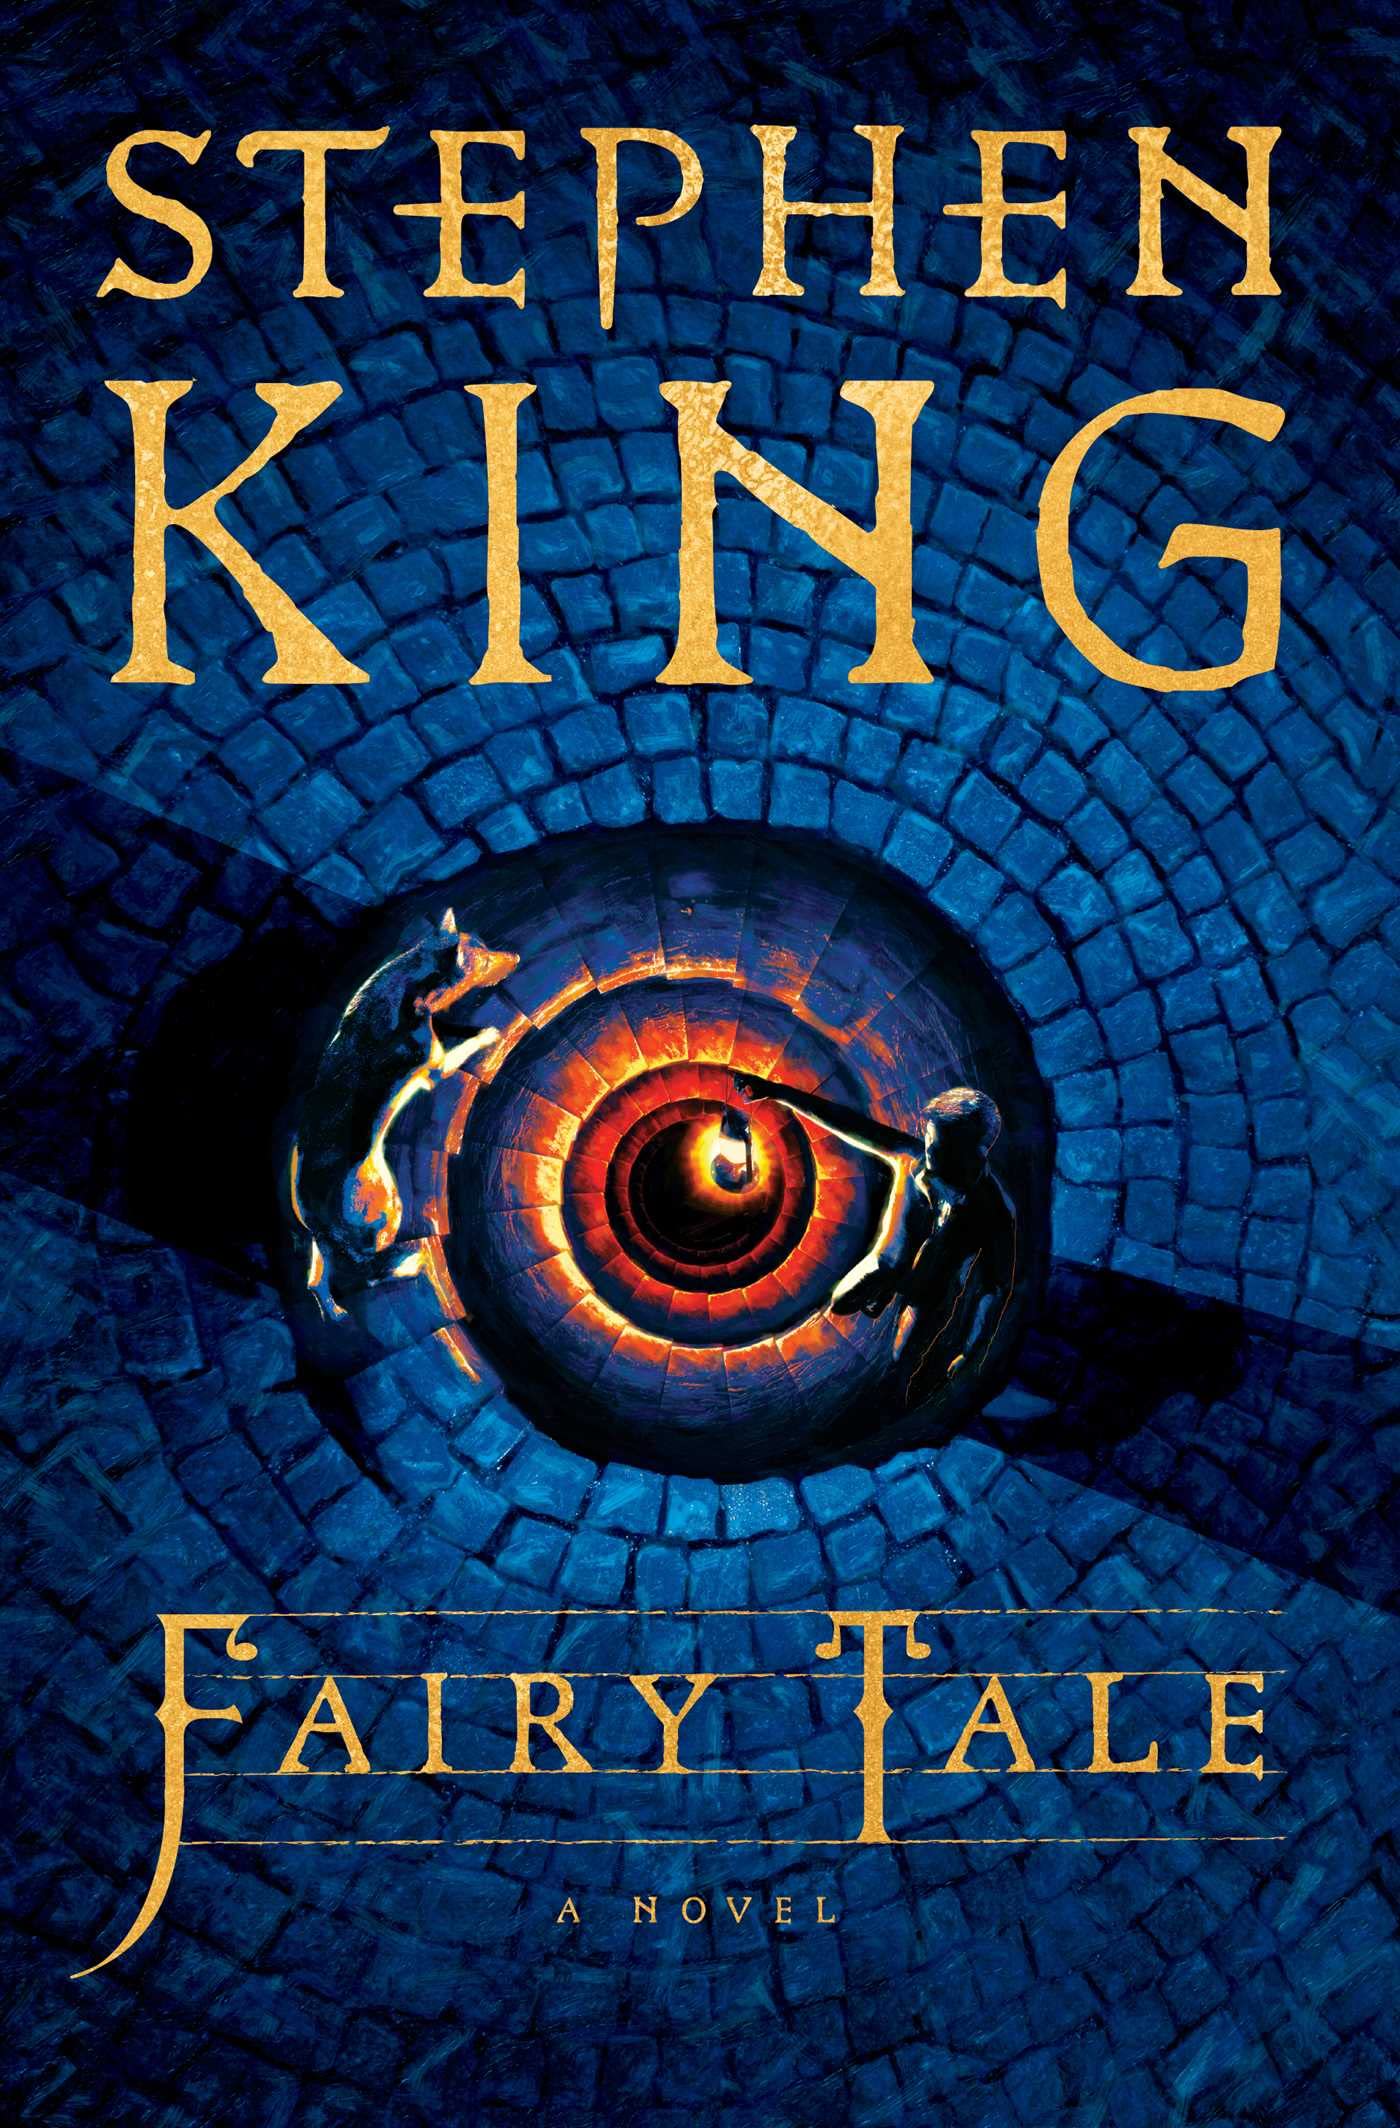 Fairy Tale by Stephen King Trade Hardcover